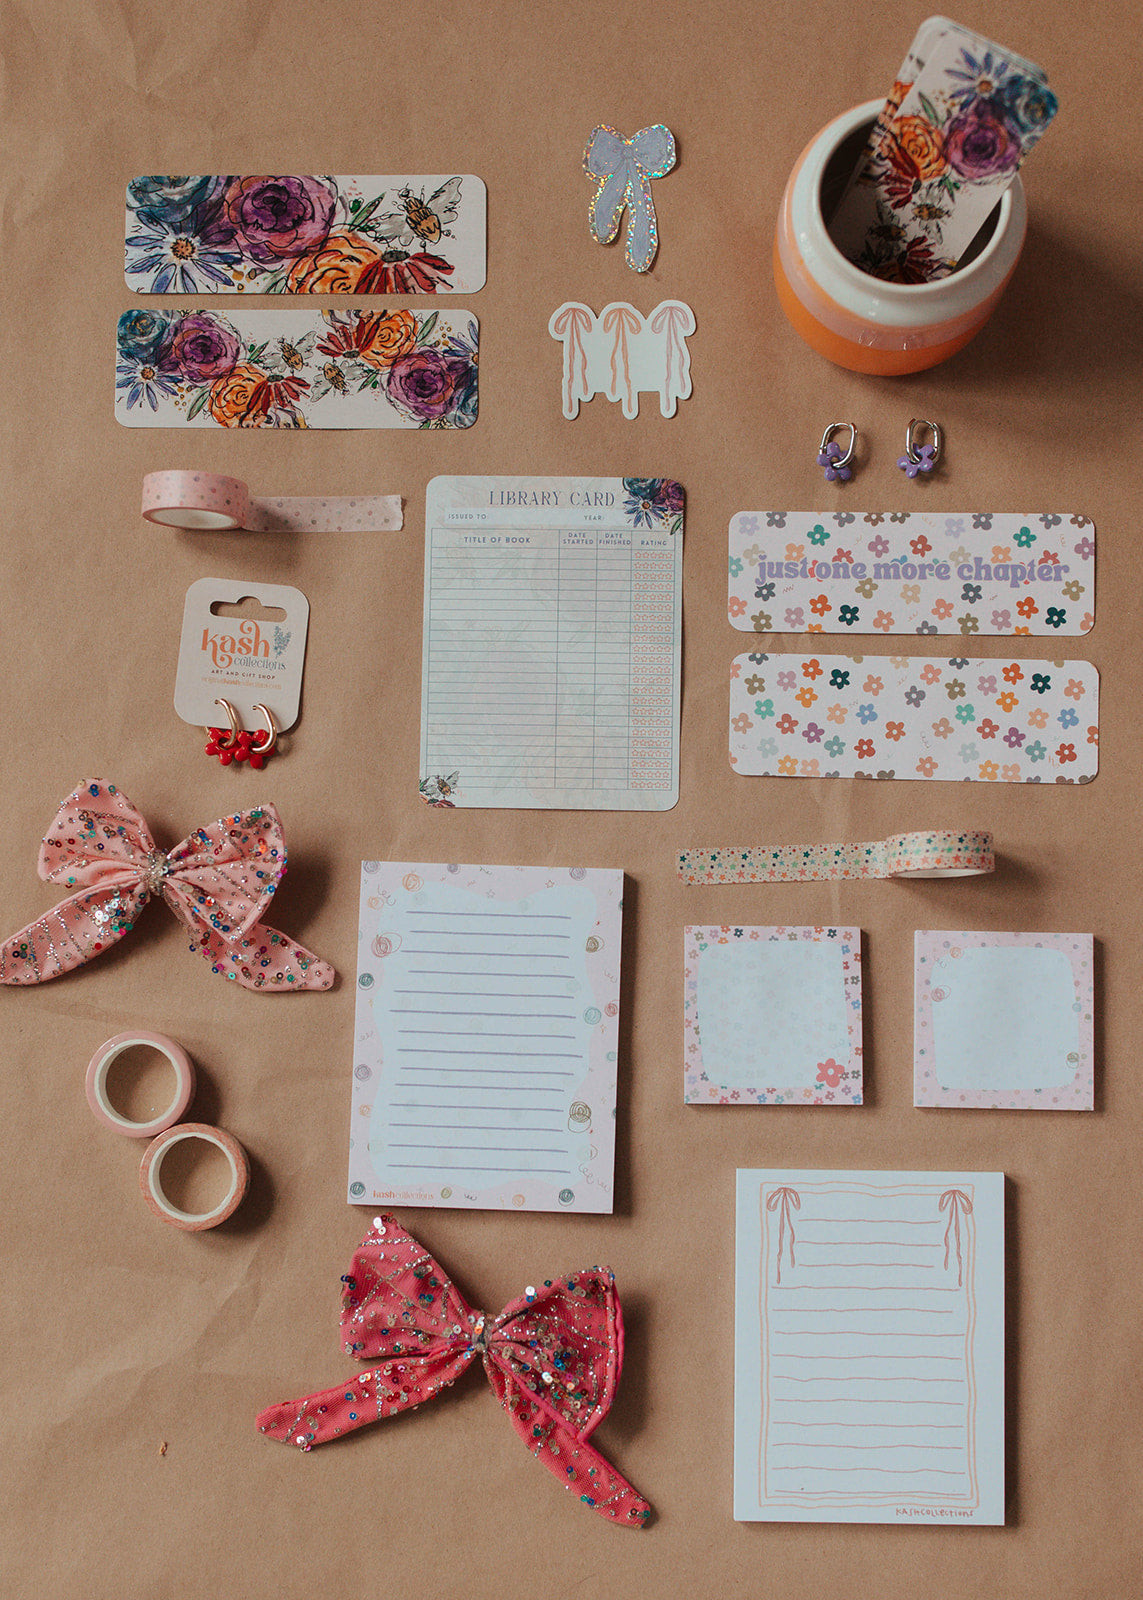 Create Your Own Stationary Pack